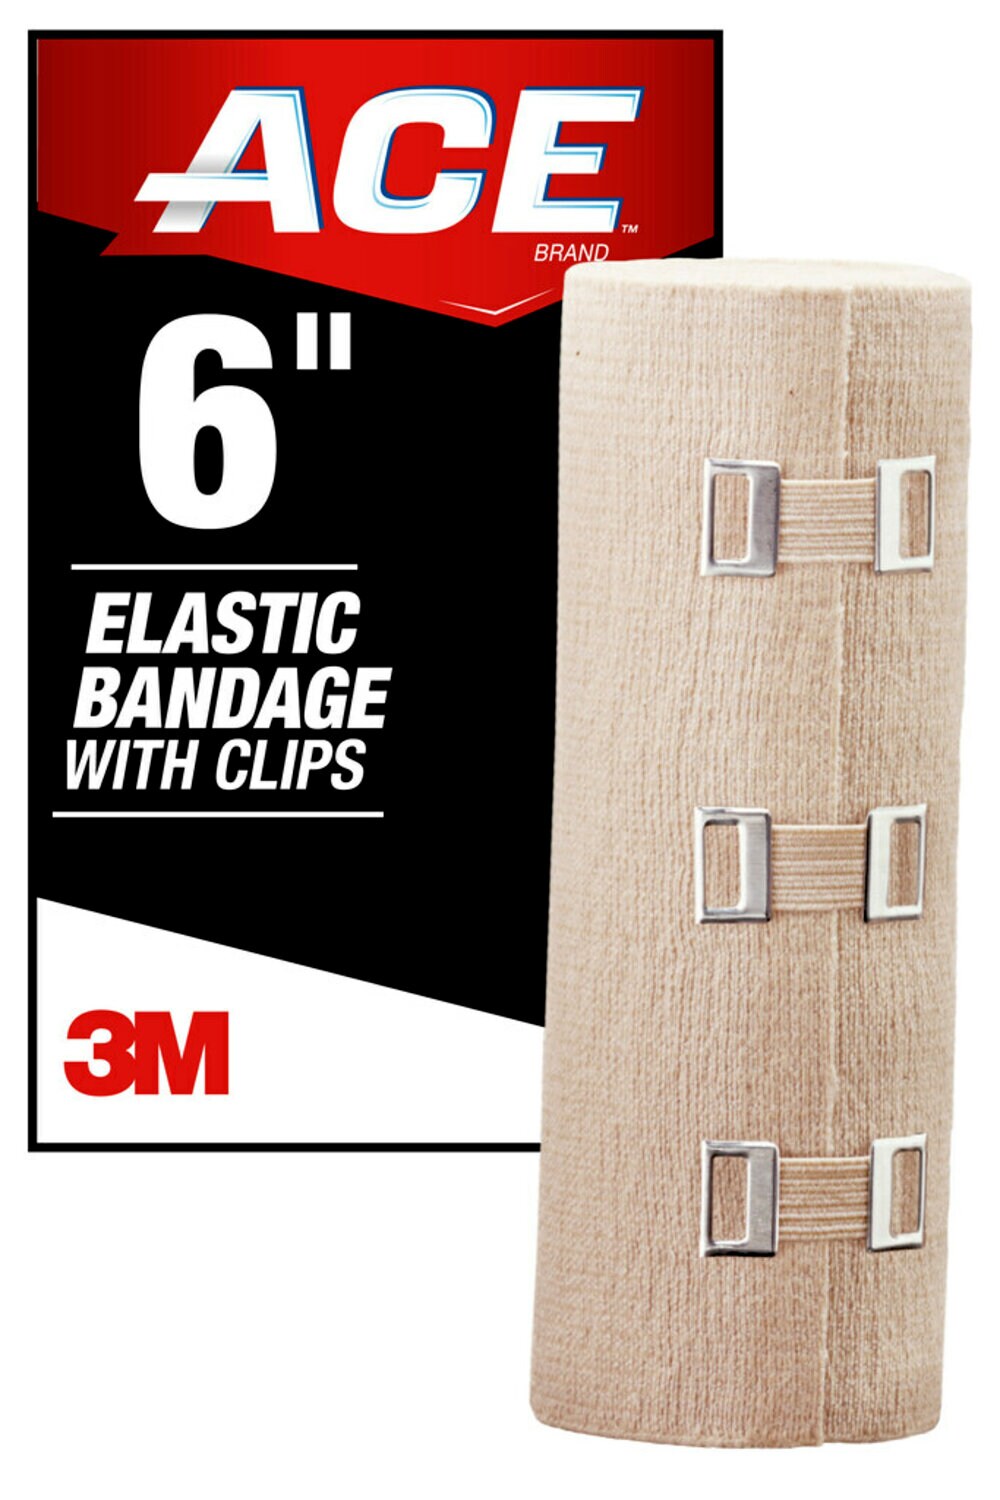 7010311664 - ACE Brand Elastic Bandage w/clips 207315, 6 in